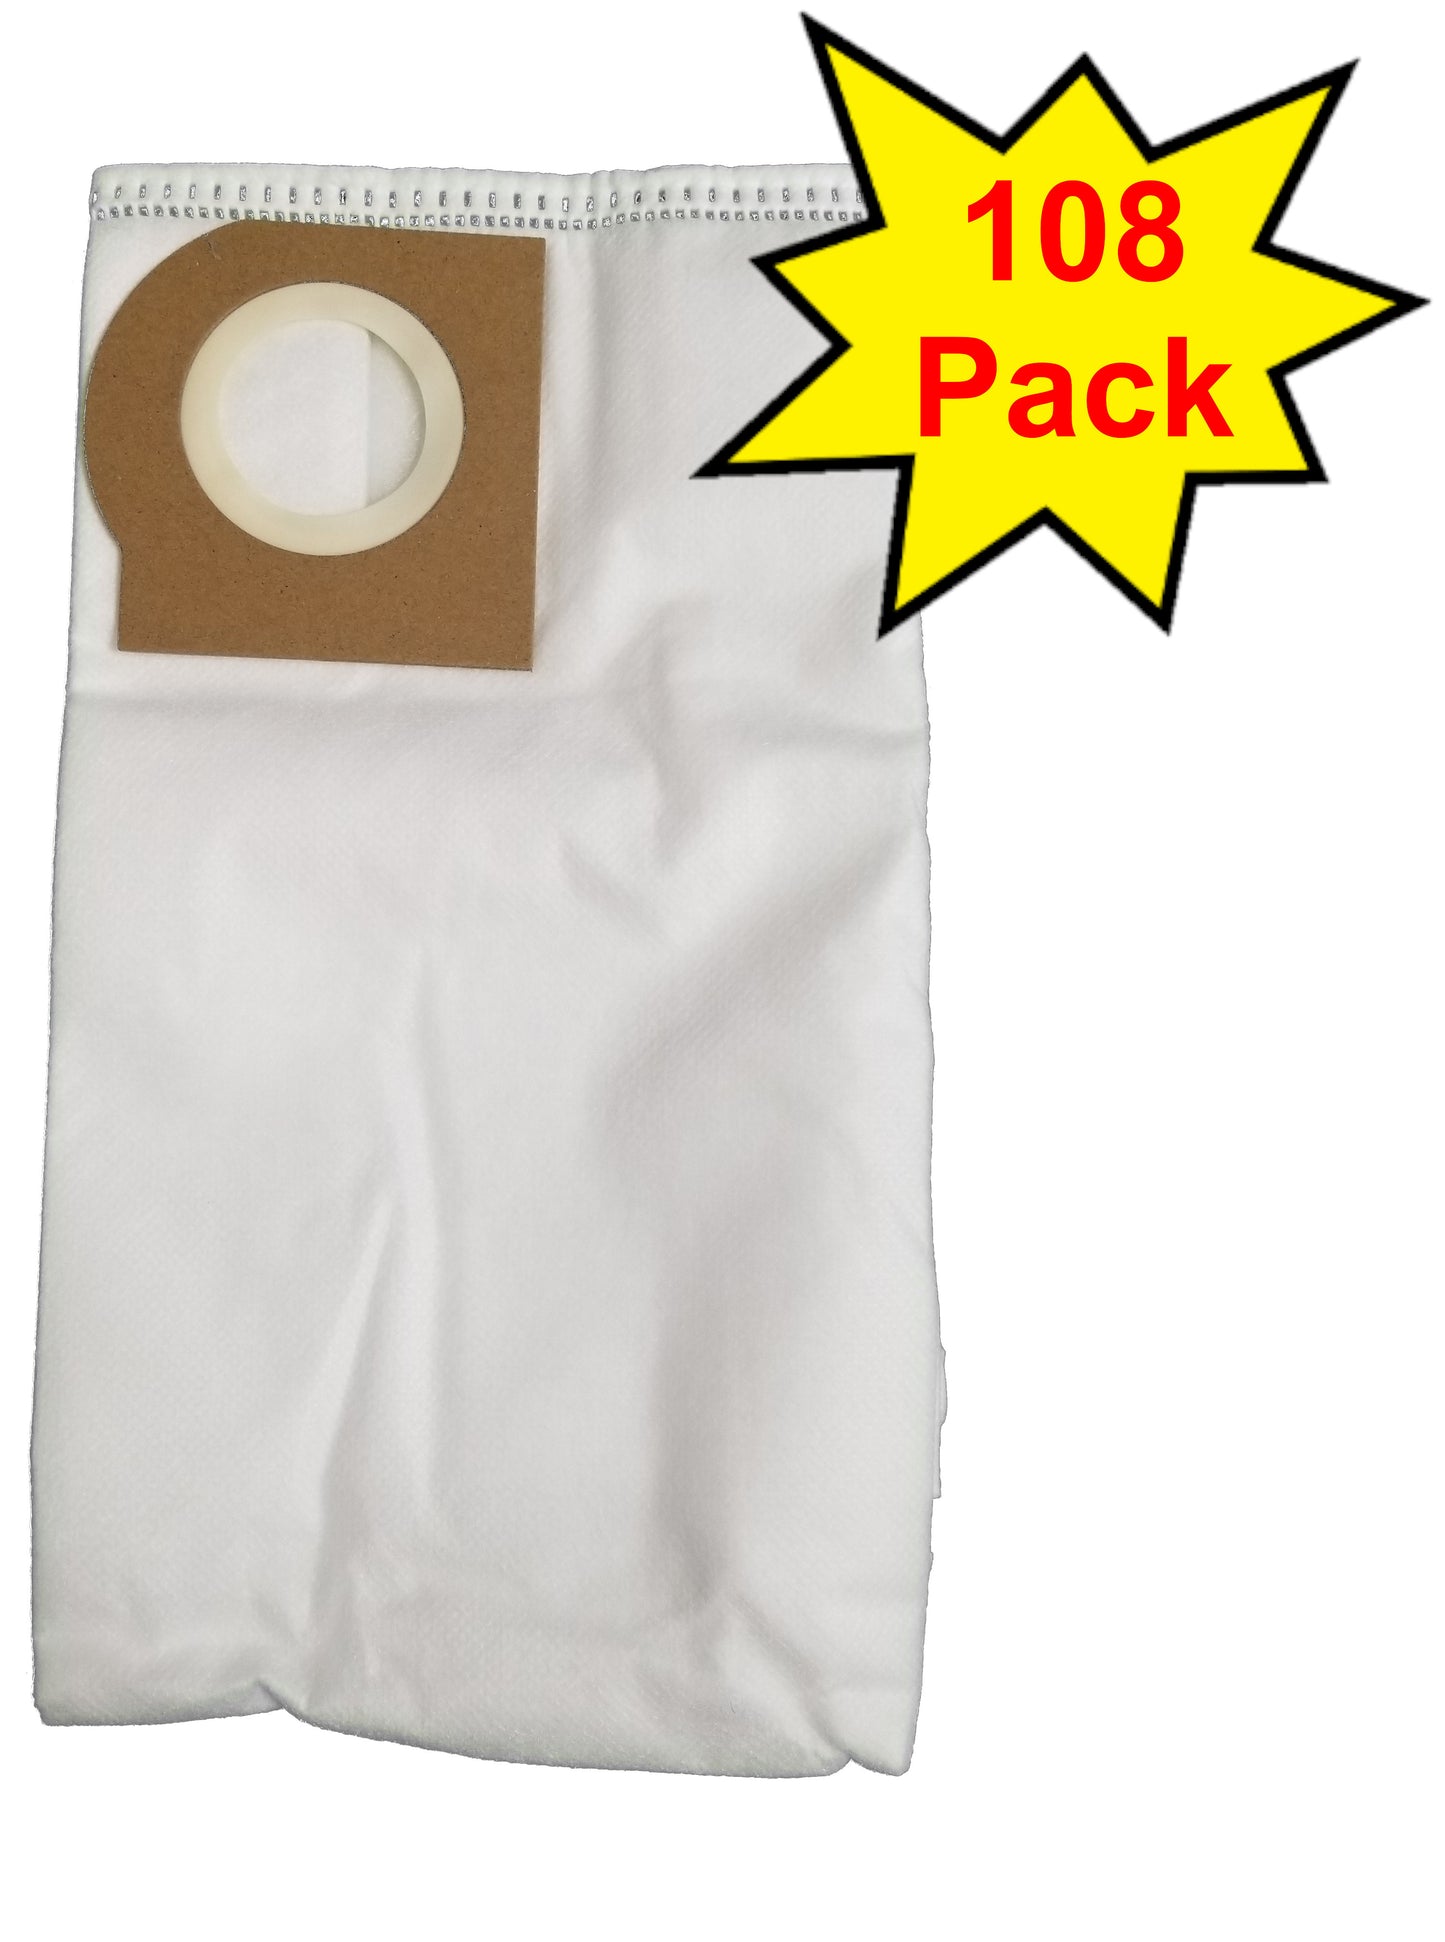 Supervacuums Type W Standard HEPA Vacuum Bags for Riccar Brilliance Vacuums Cleaners